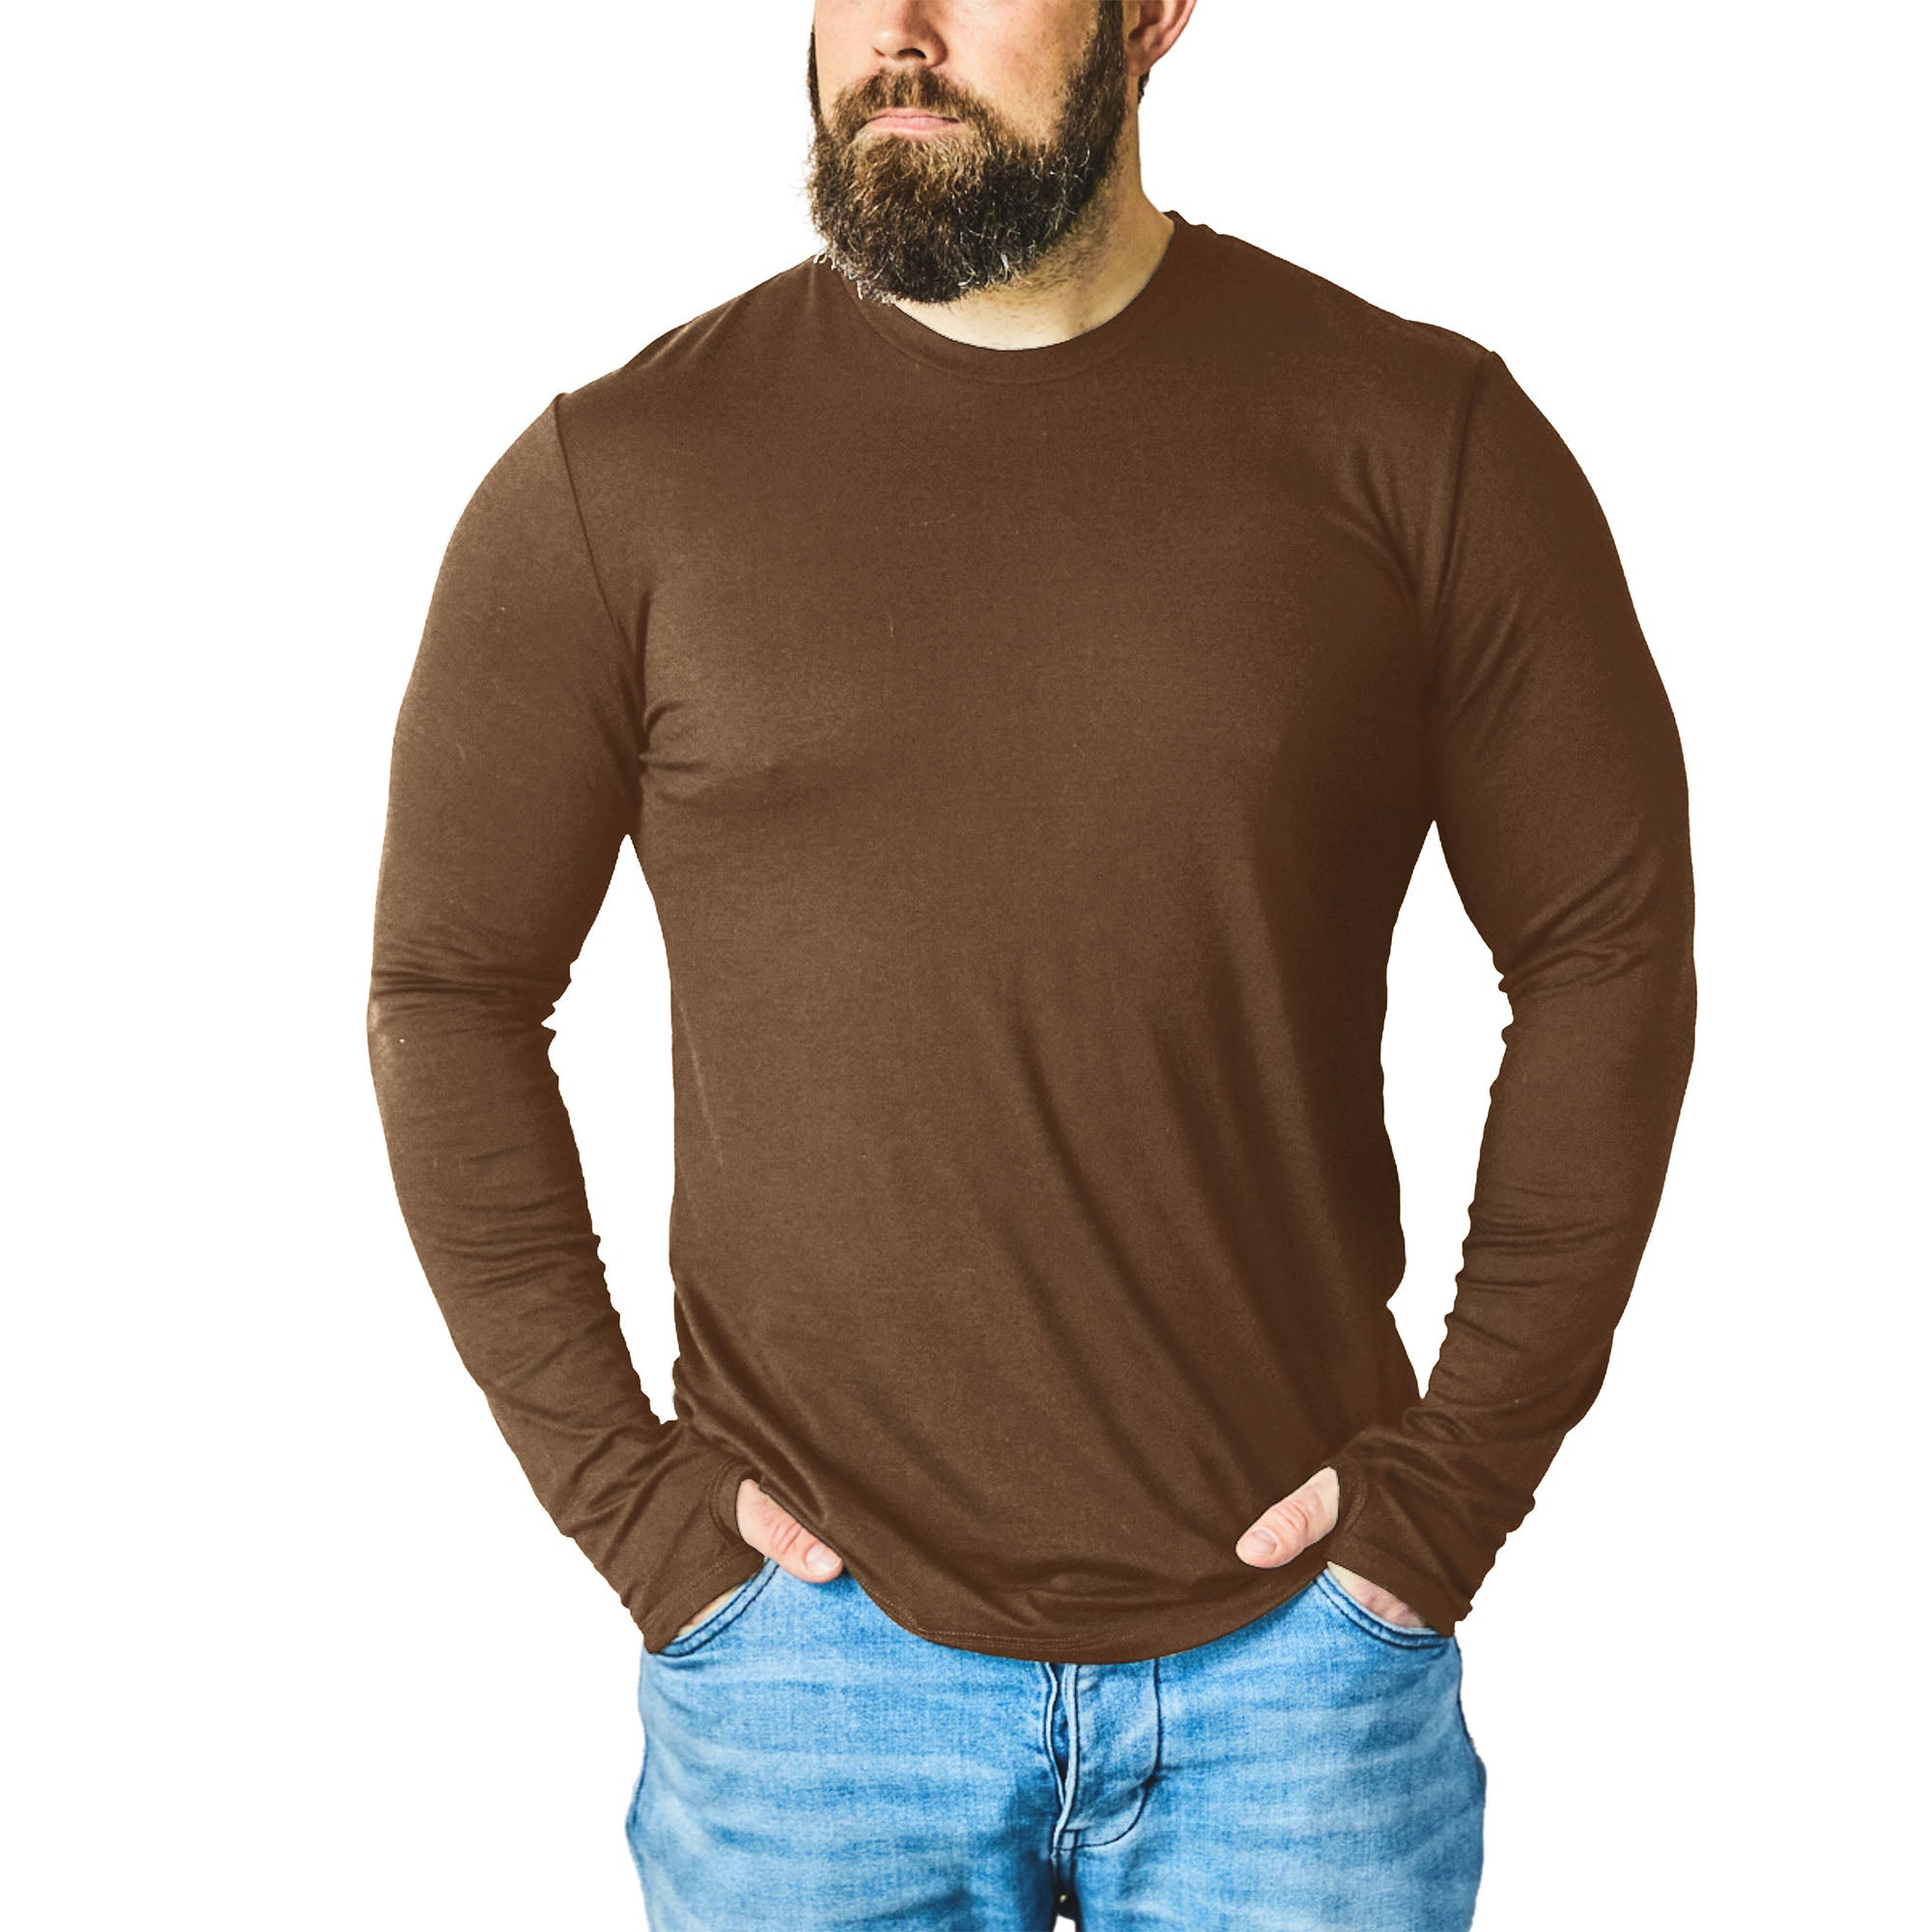 Merino 365 OG Long Sleeve with Thumbloops Top, Espresso Brown